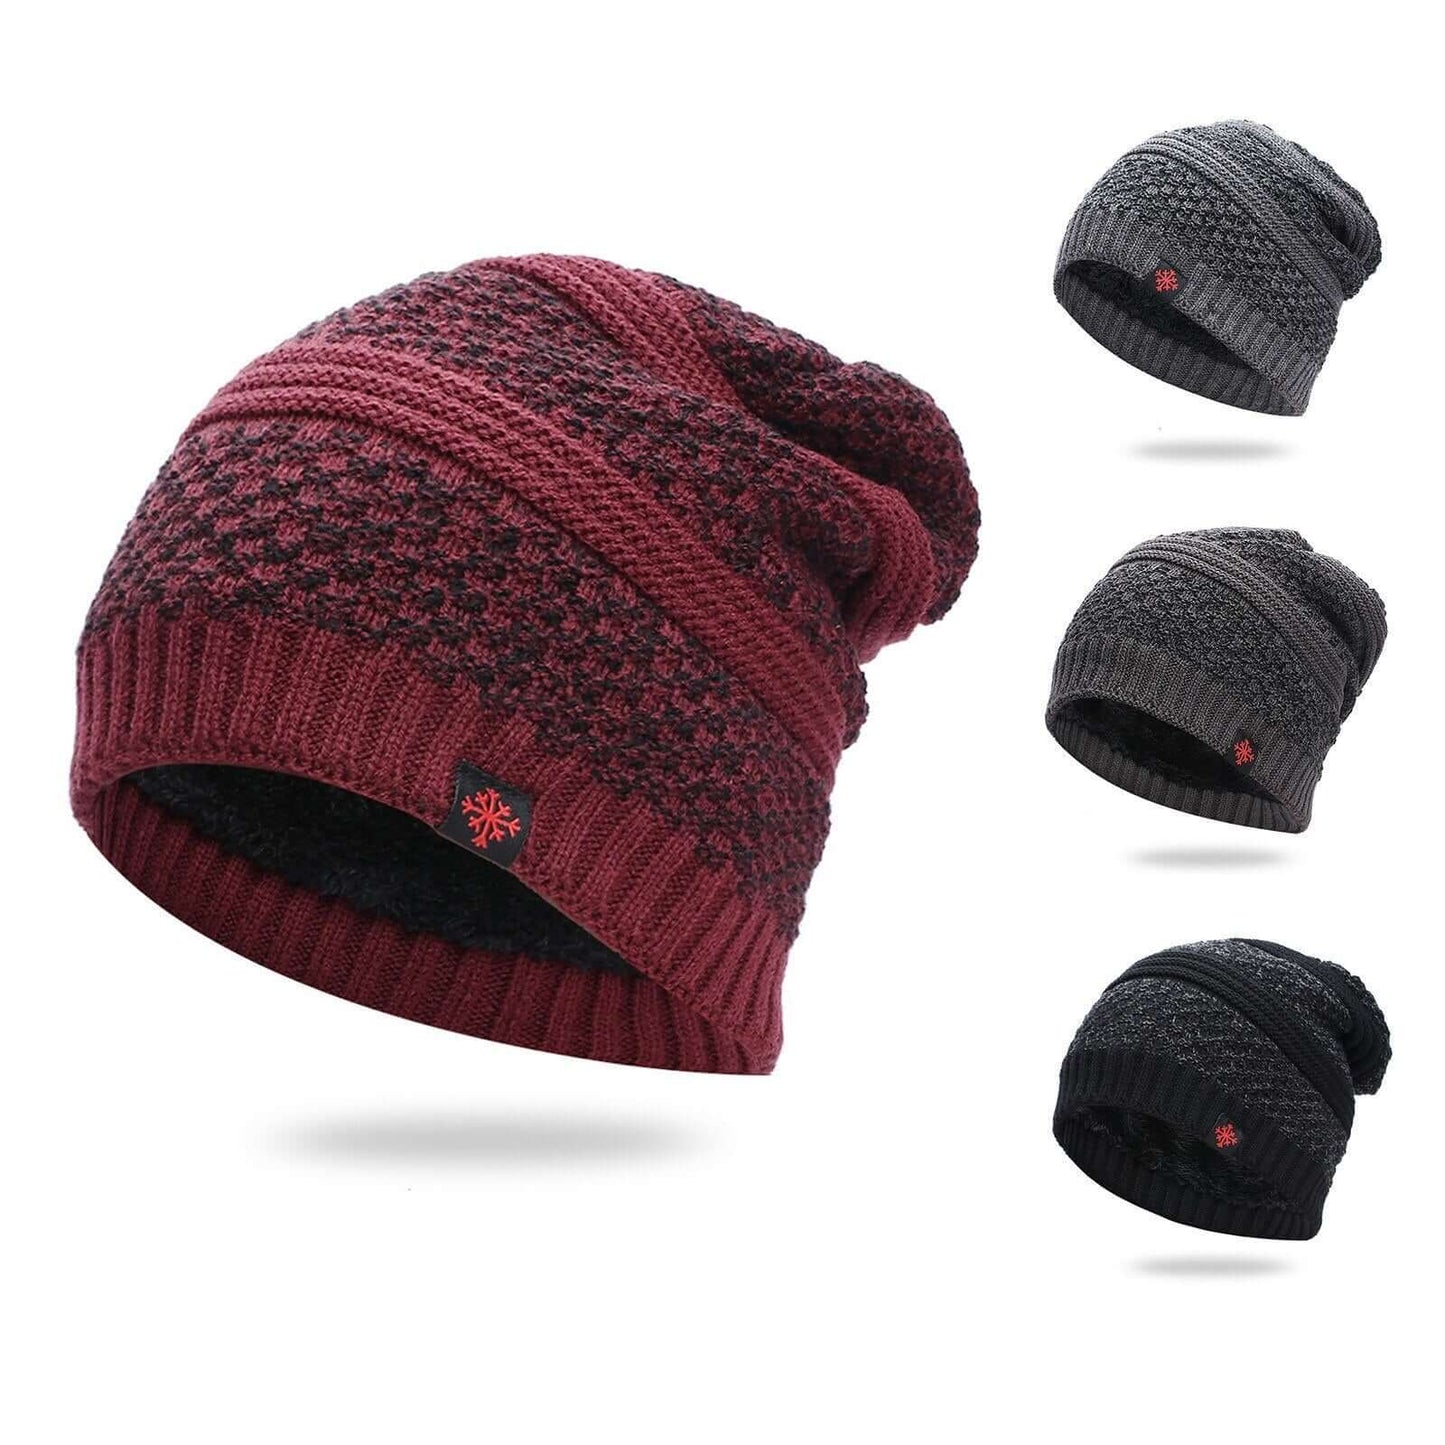 Winter Stitched Beanies